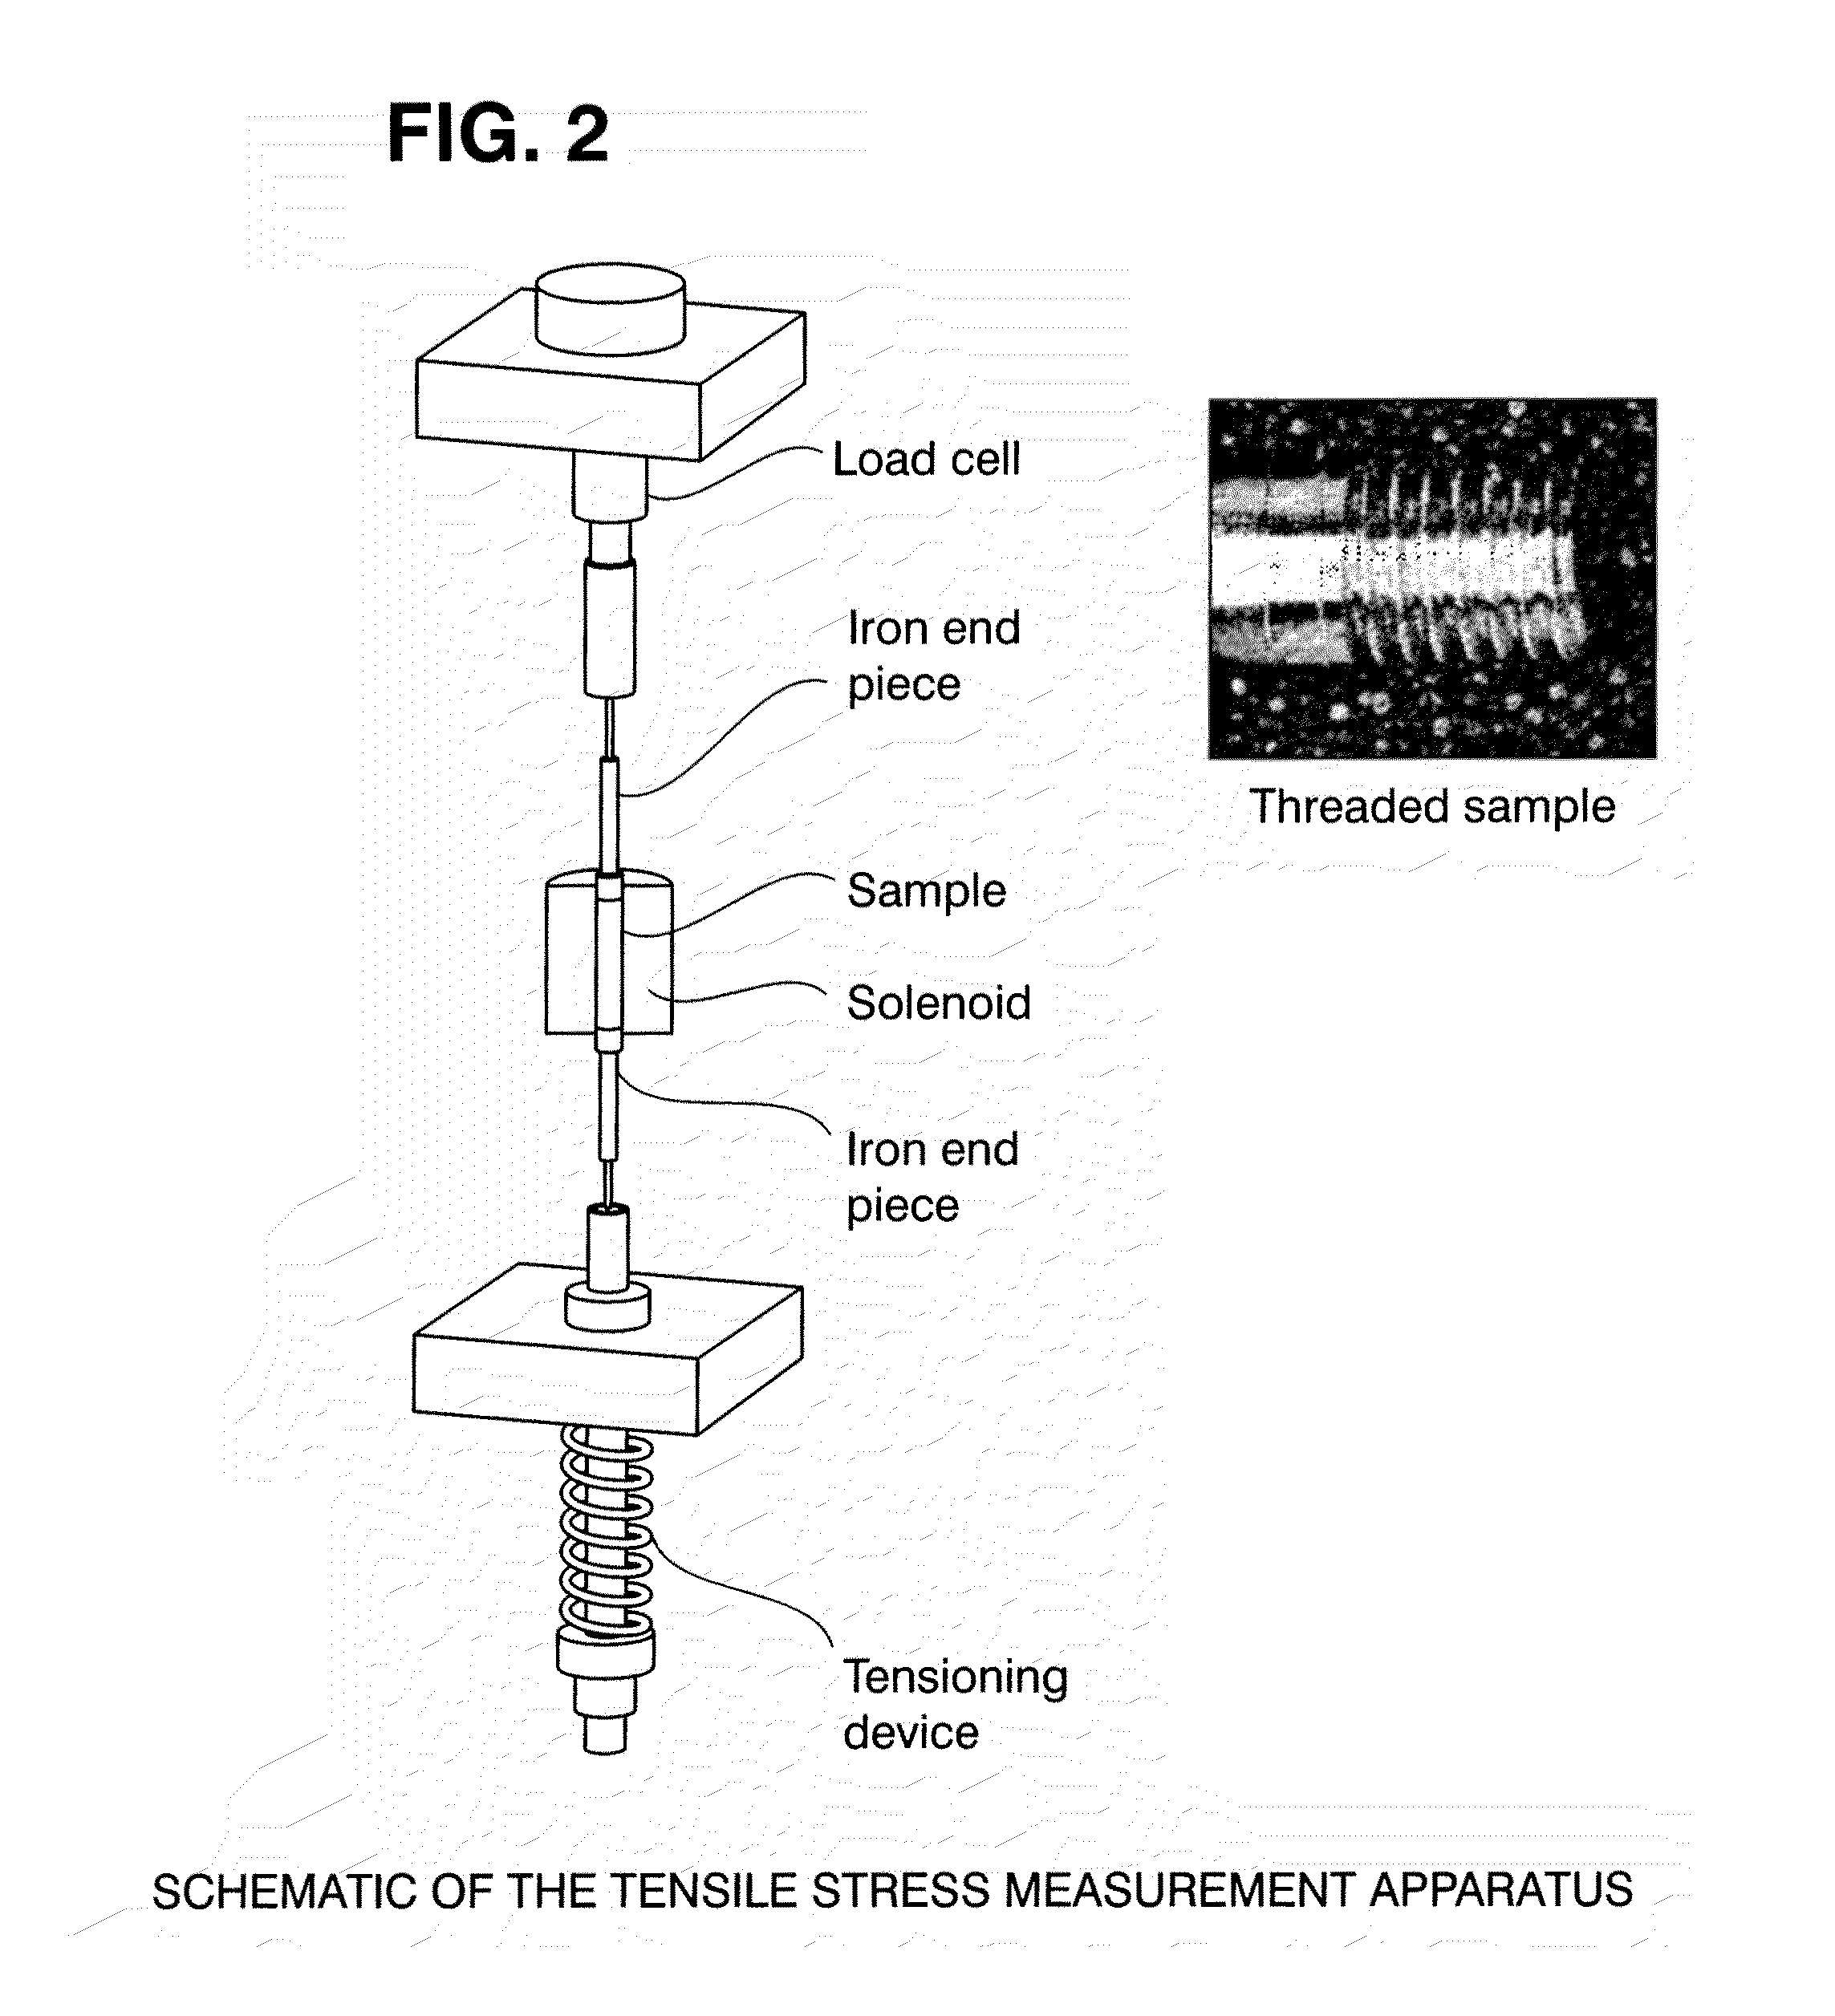 Method of achieving high transduction under tension or compression